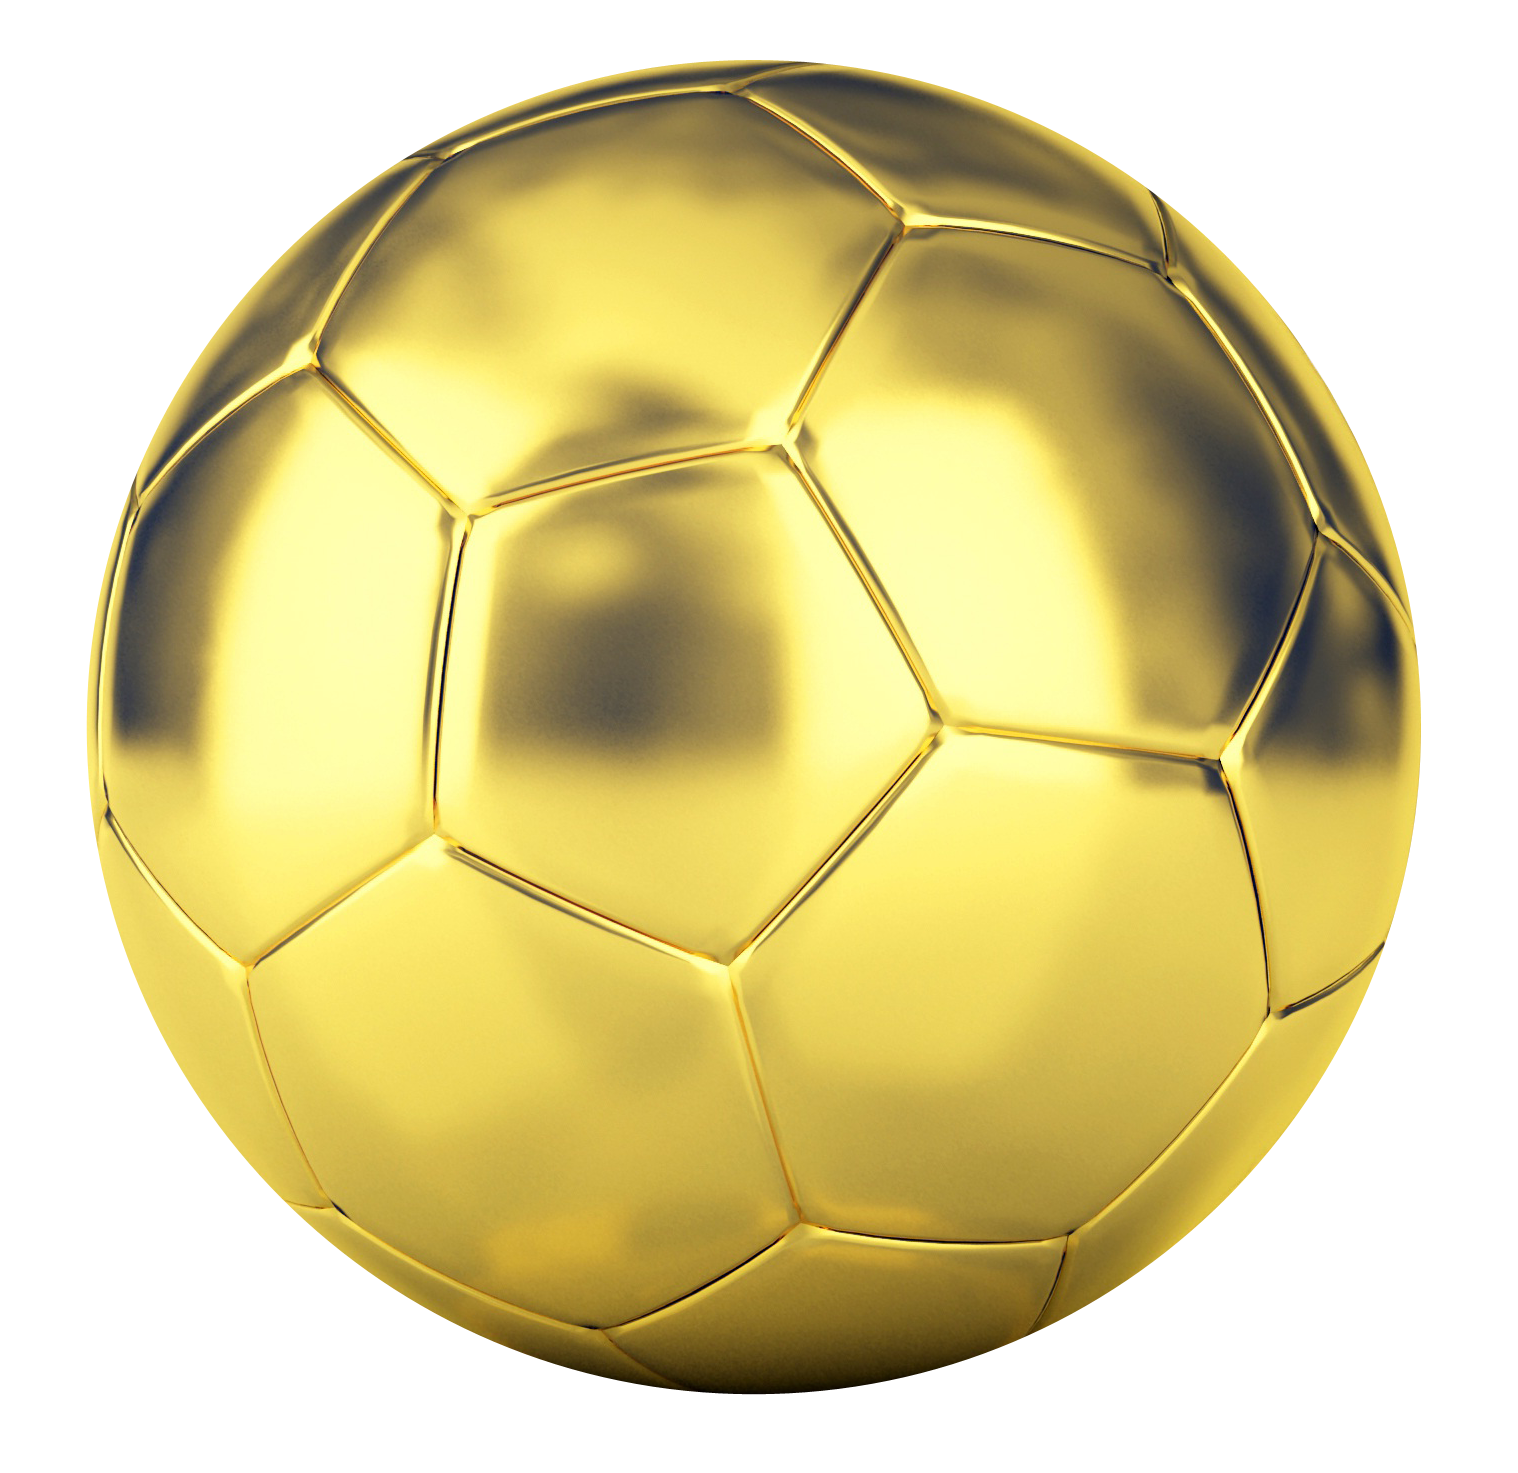 A Gold Football Ball On A Black Background